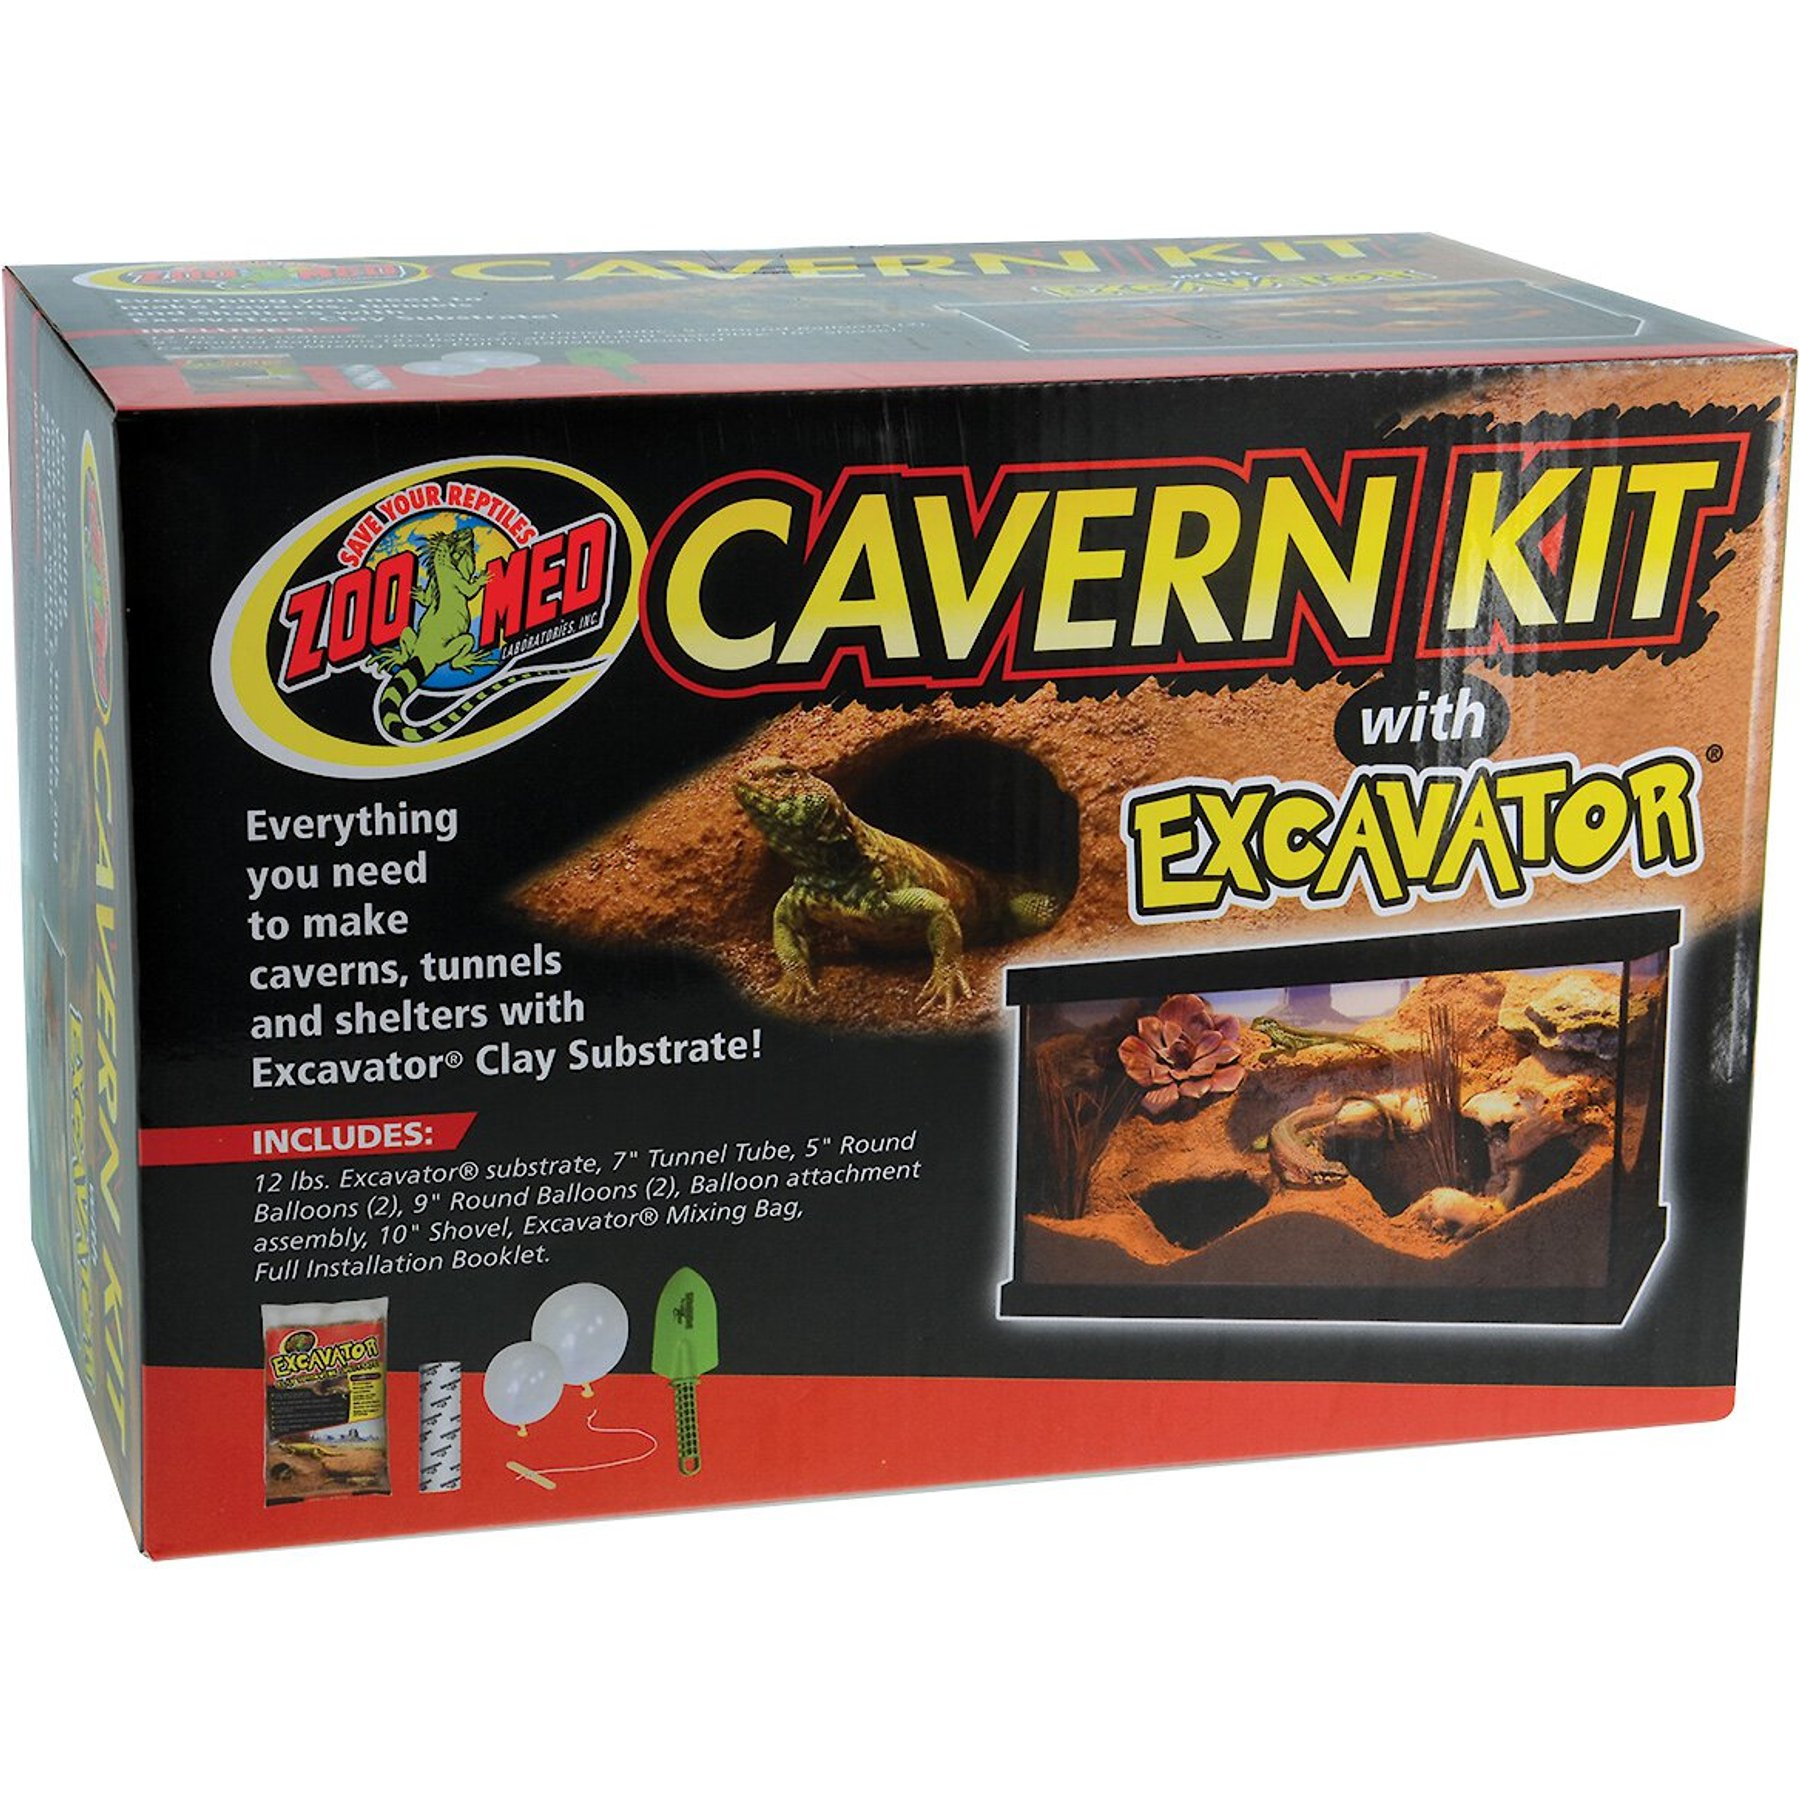 Cavern Kit with Excavator® Clay Burrowing Substrate